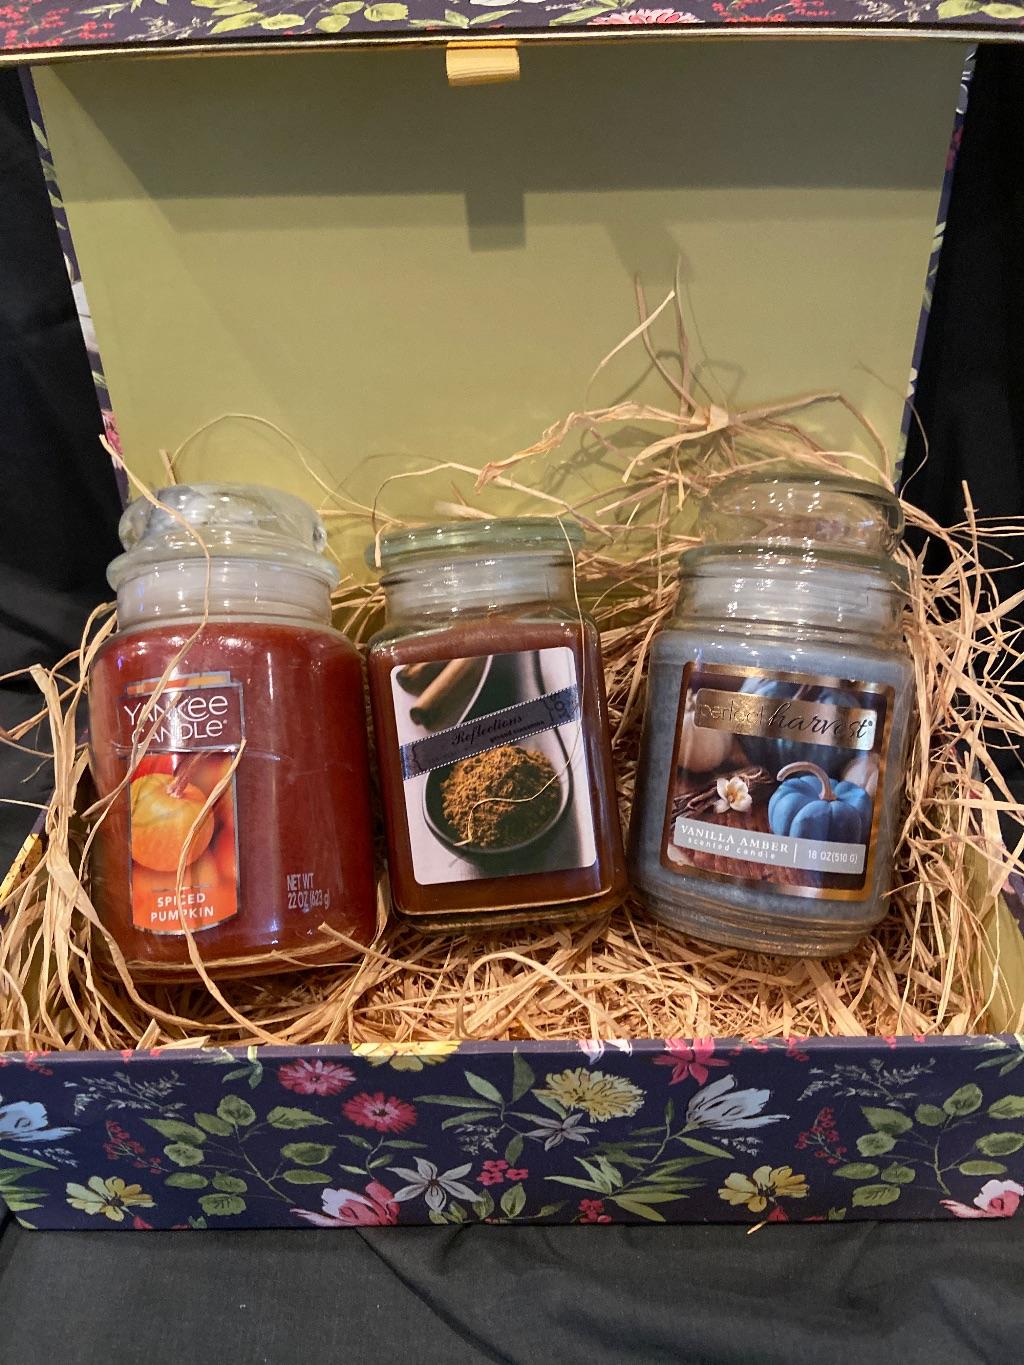 Scented Candles Times 3 + CrashMasters $20 Gift Card